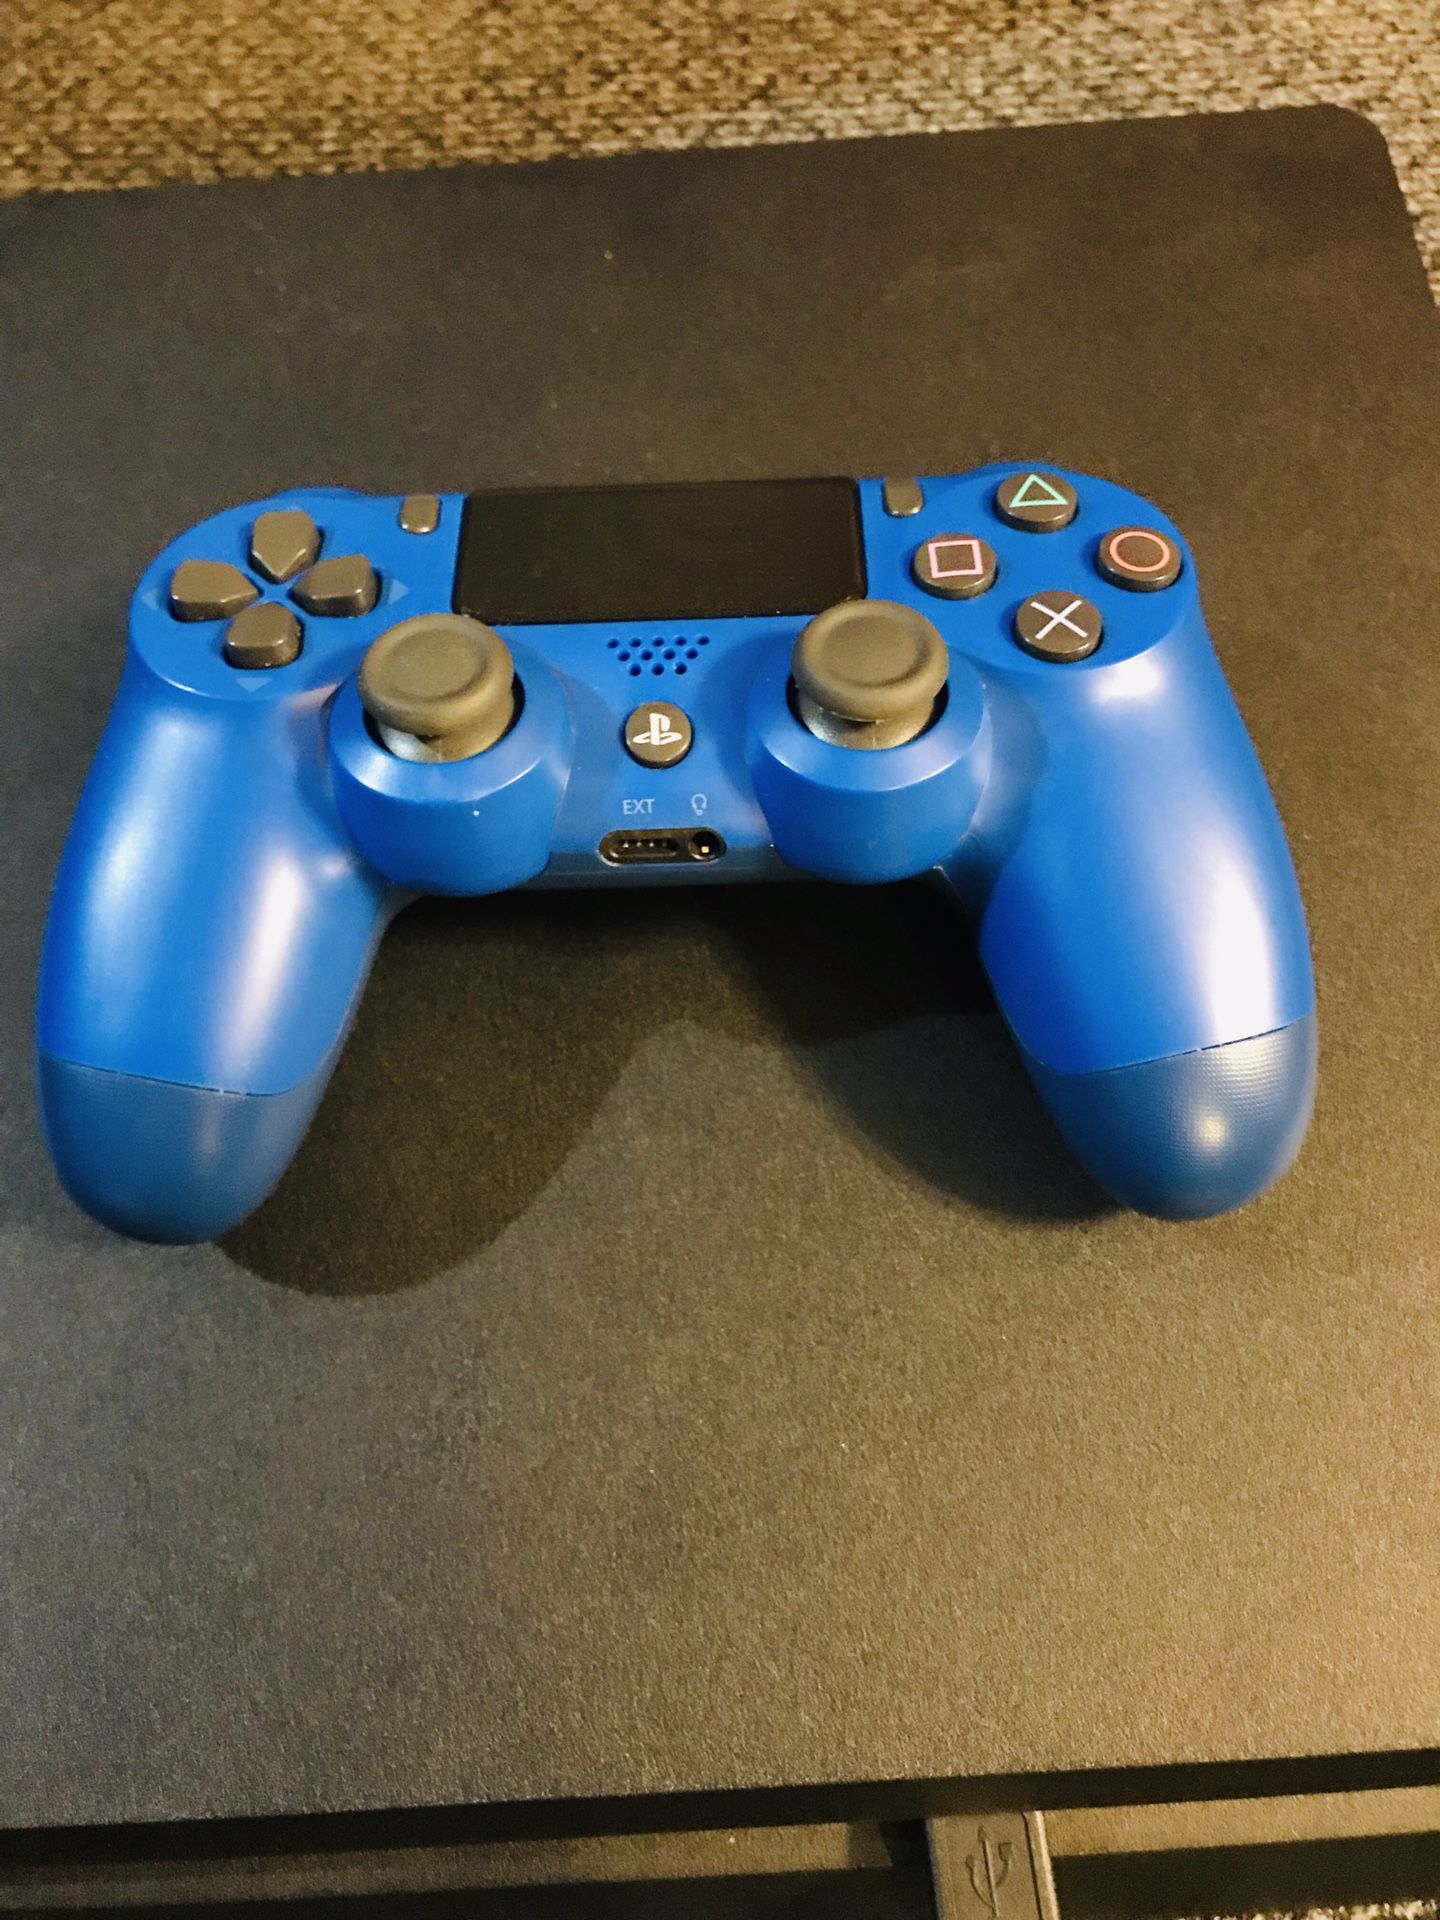 PlayStation slam brand new works perfect and with blue controller